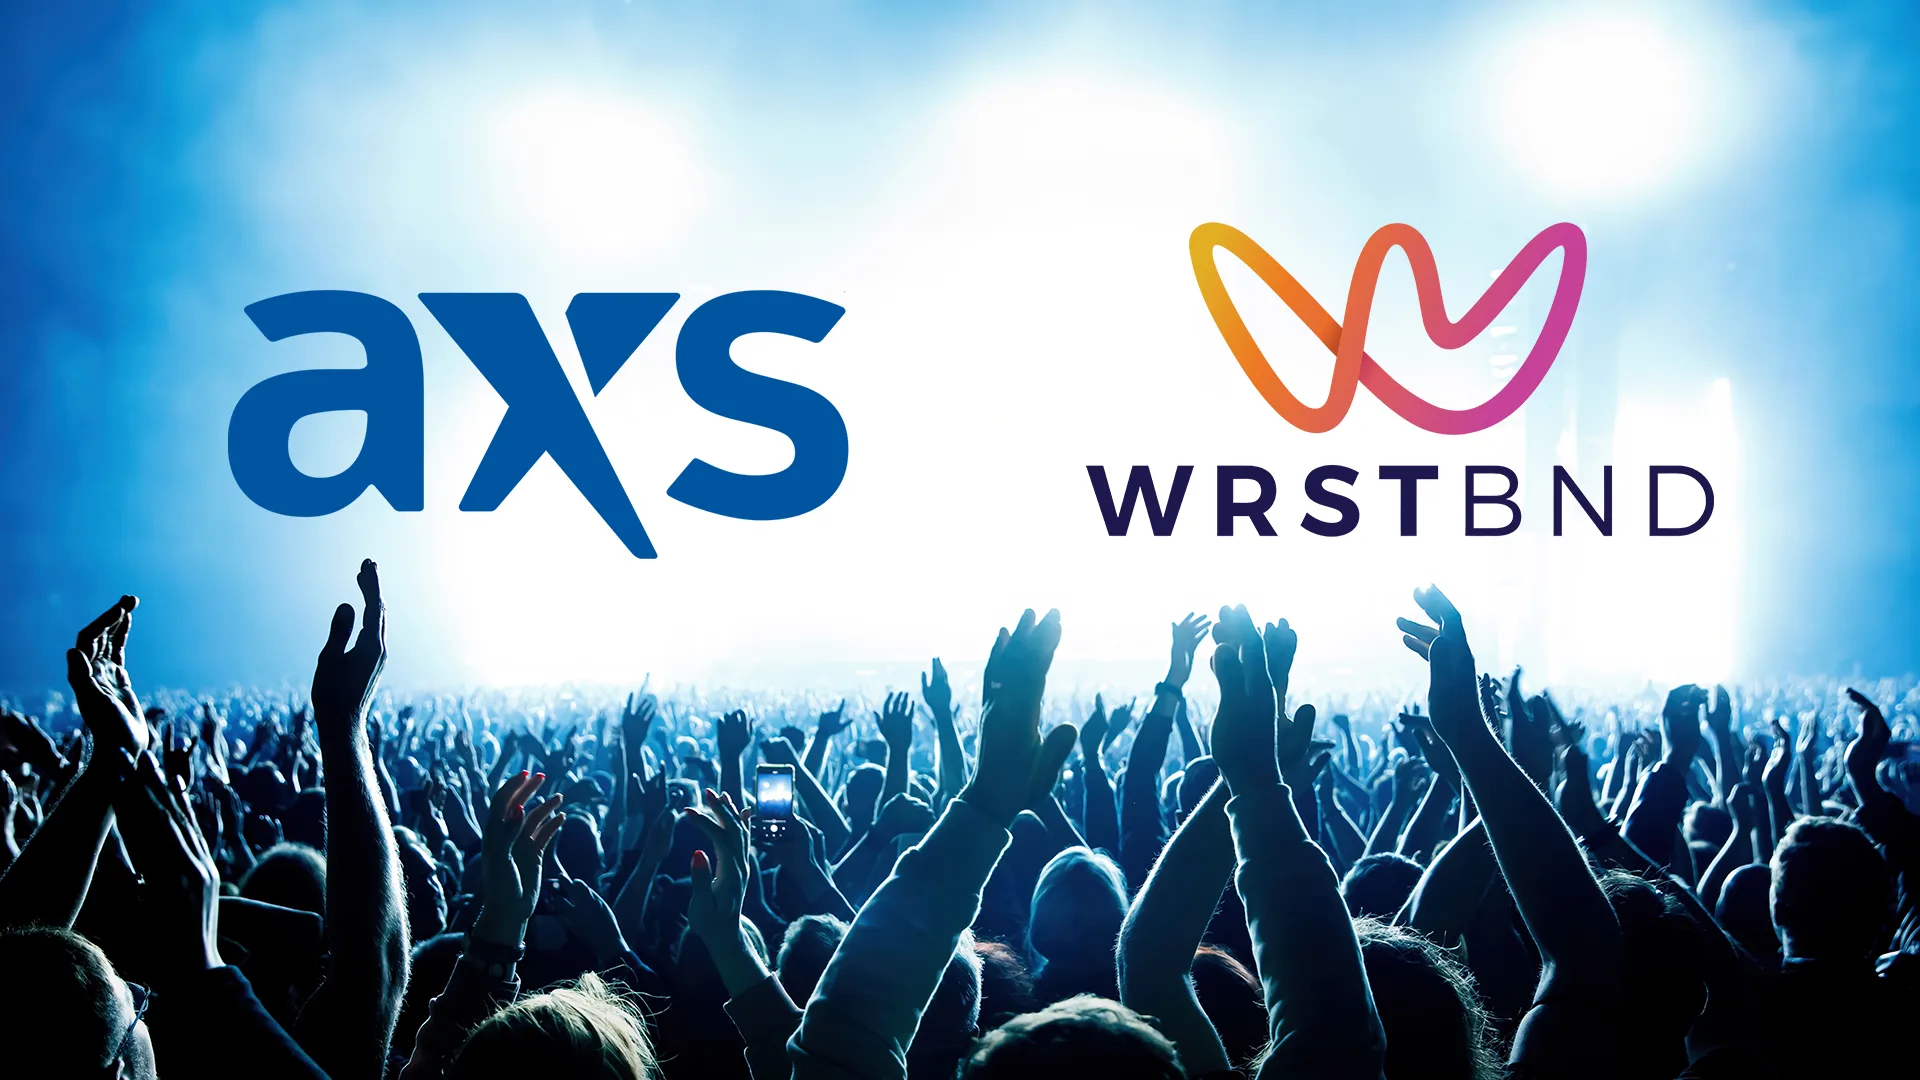 Image of the AXS and WRSTBND logos over a cheering crowd background photo